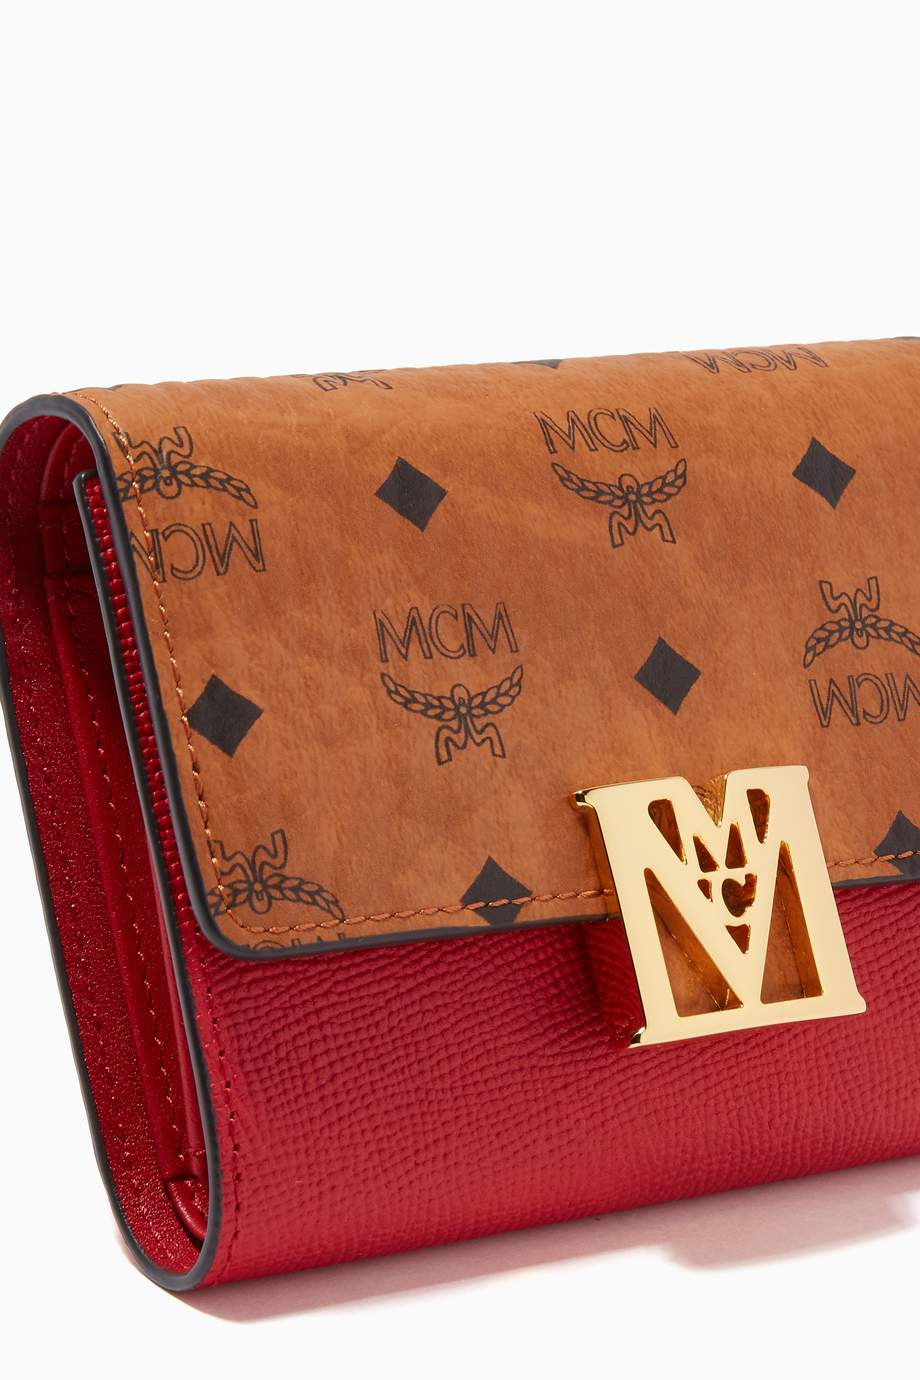 Shop MCM Red Small Mena Wallet in Visetos & Leather for Women | Ounass UAE